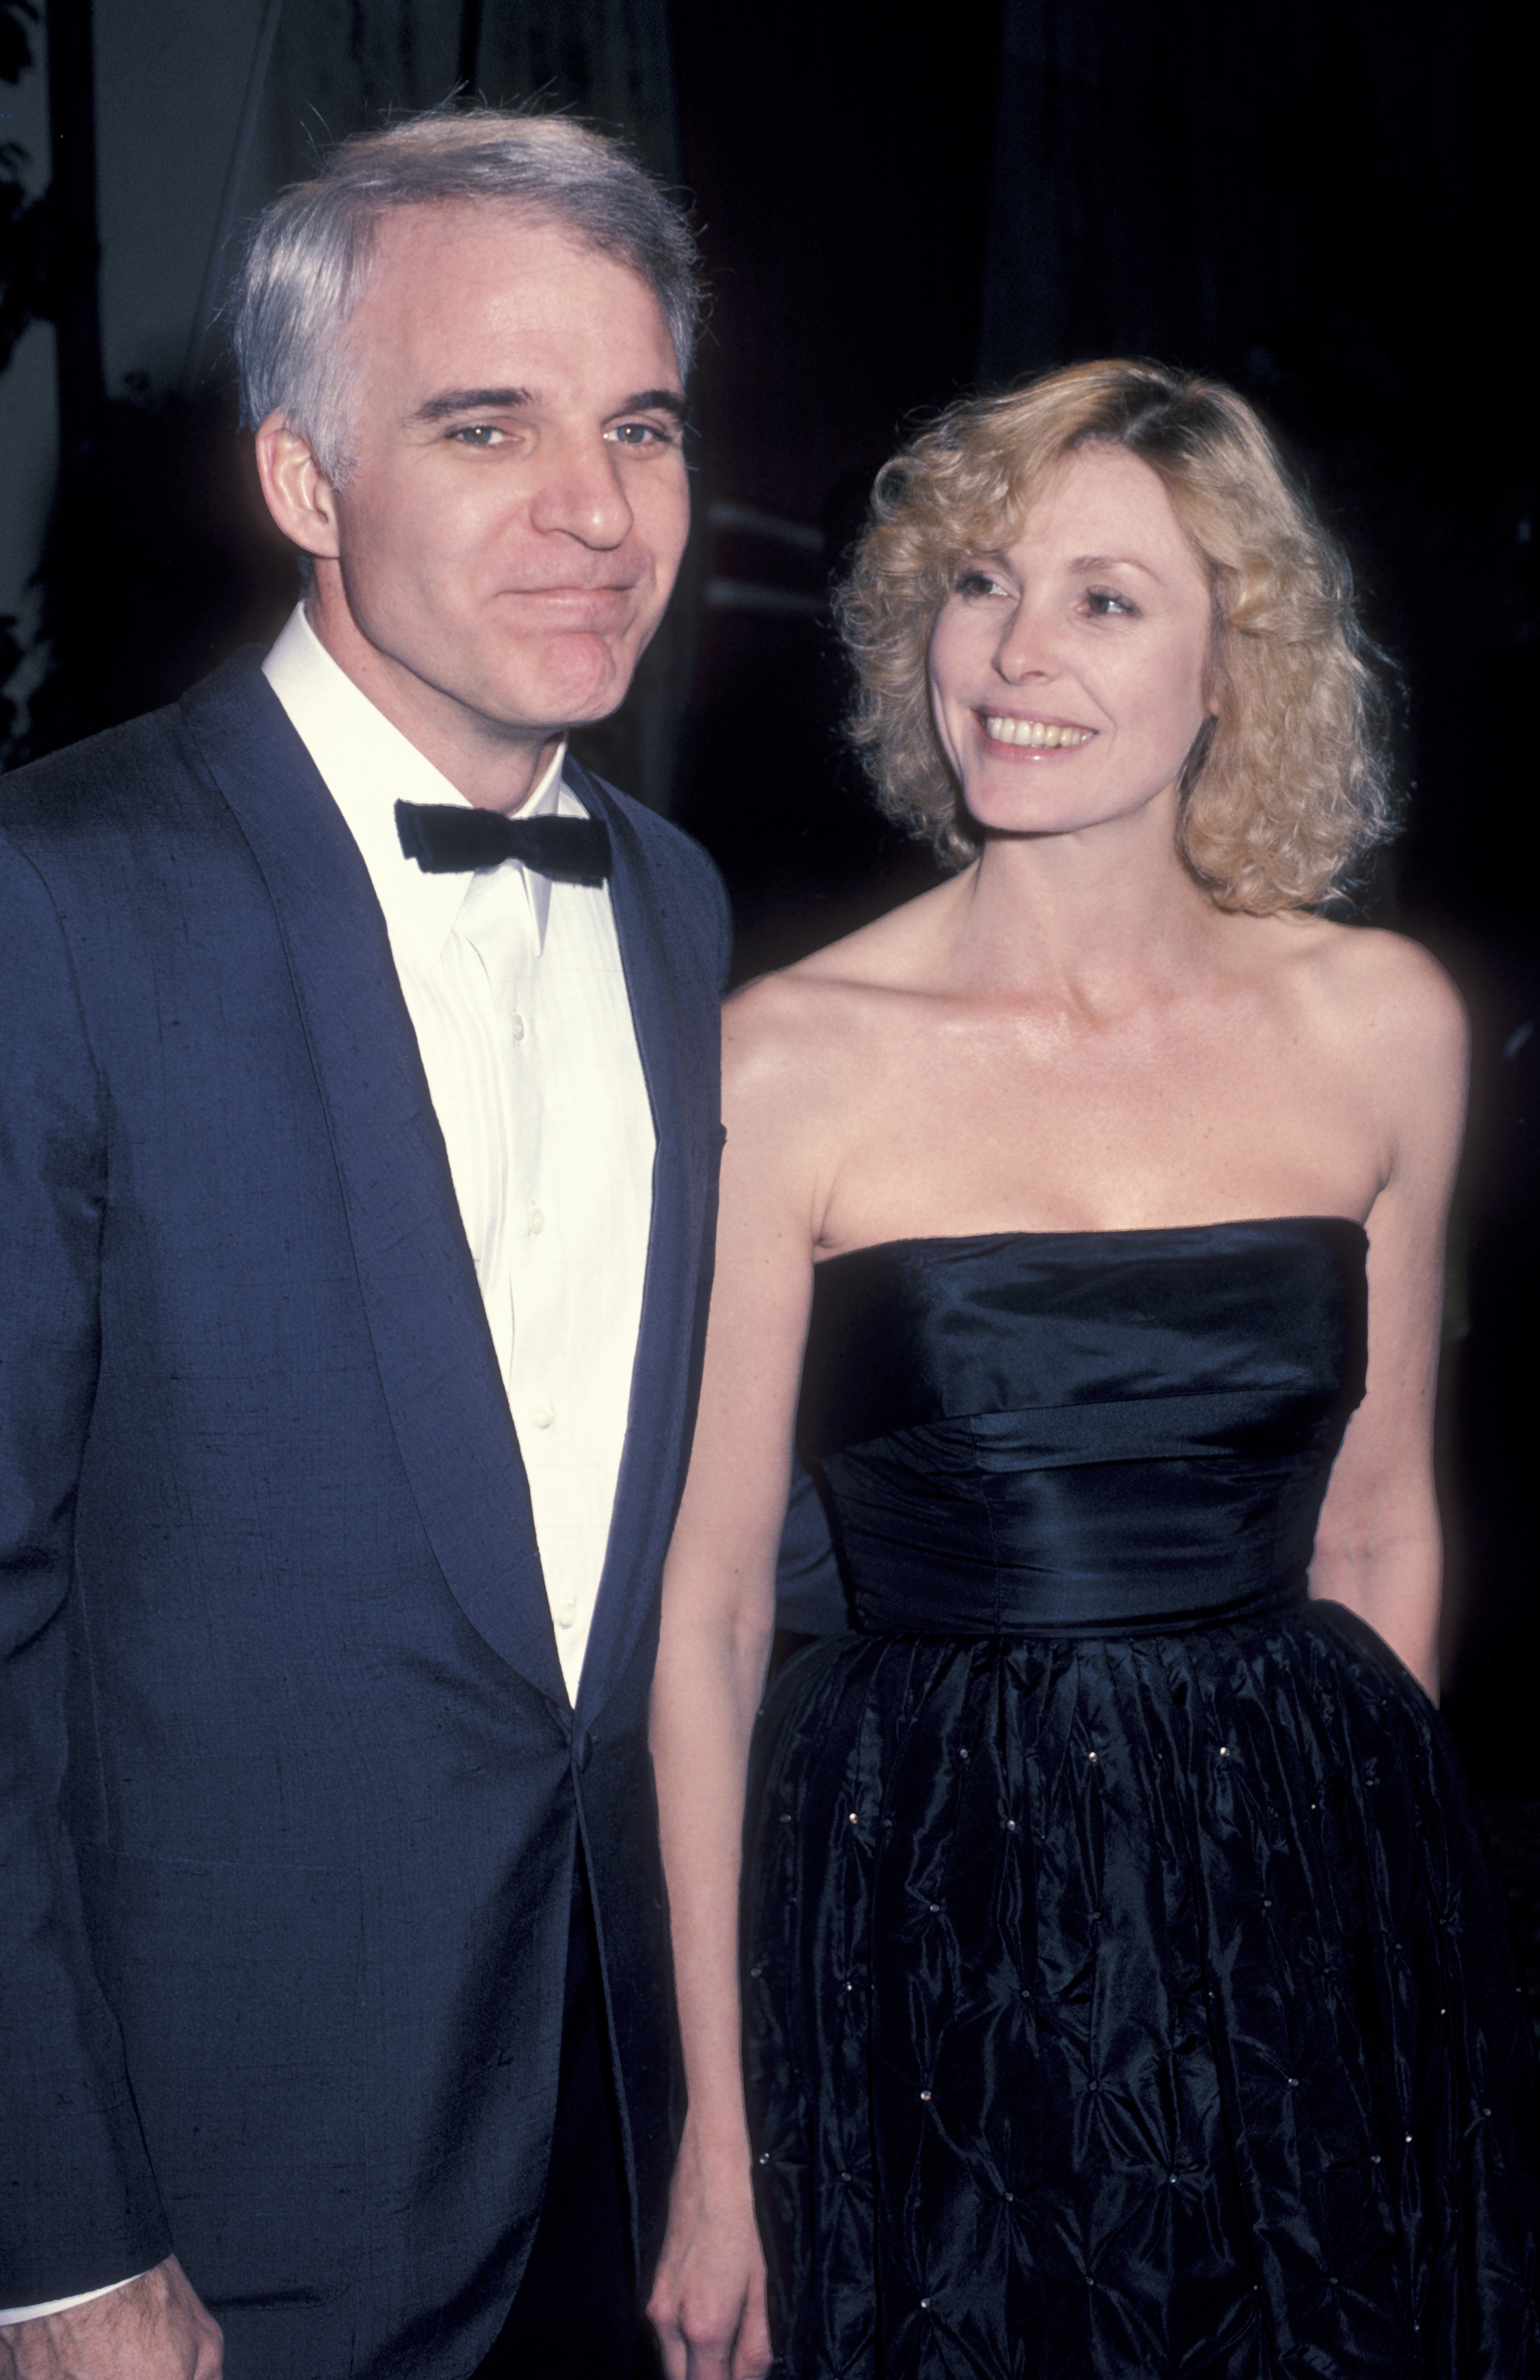 Steve Martin and Victoria Tennant were married from 1986 to 1994